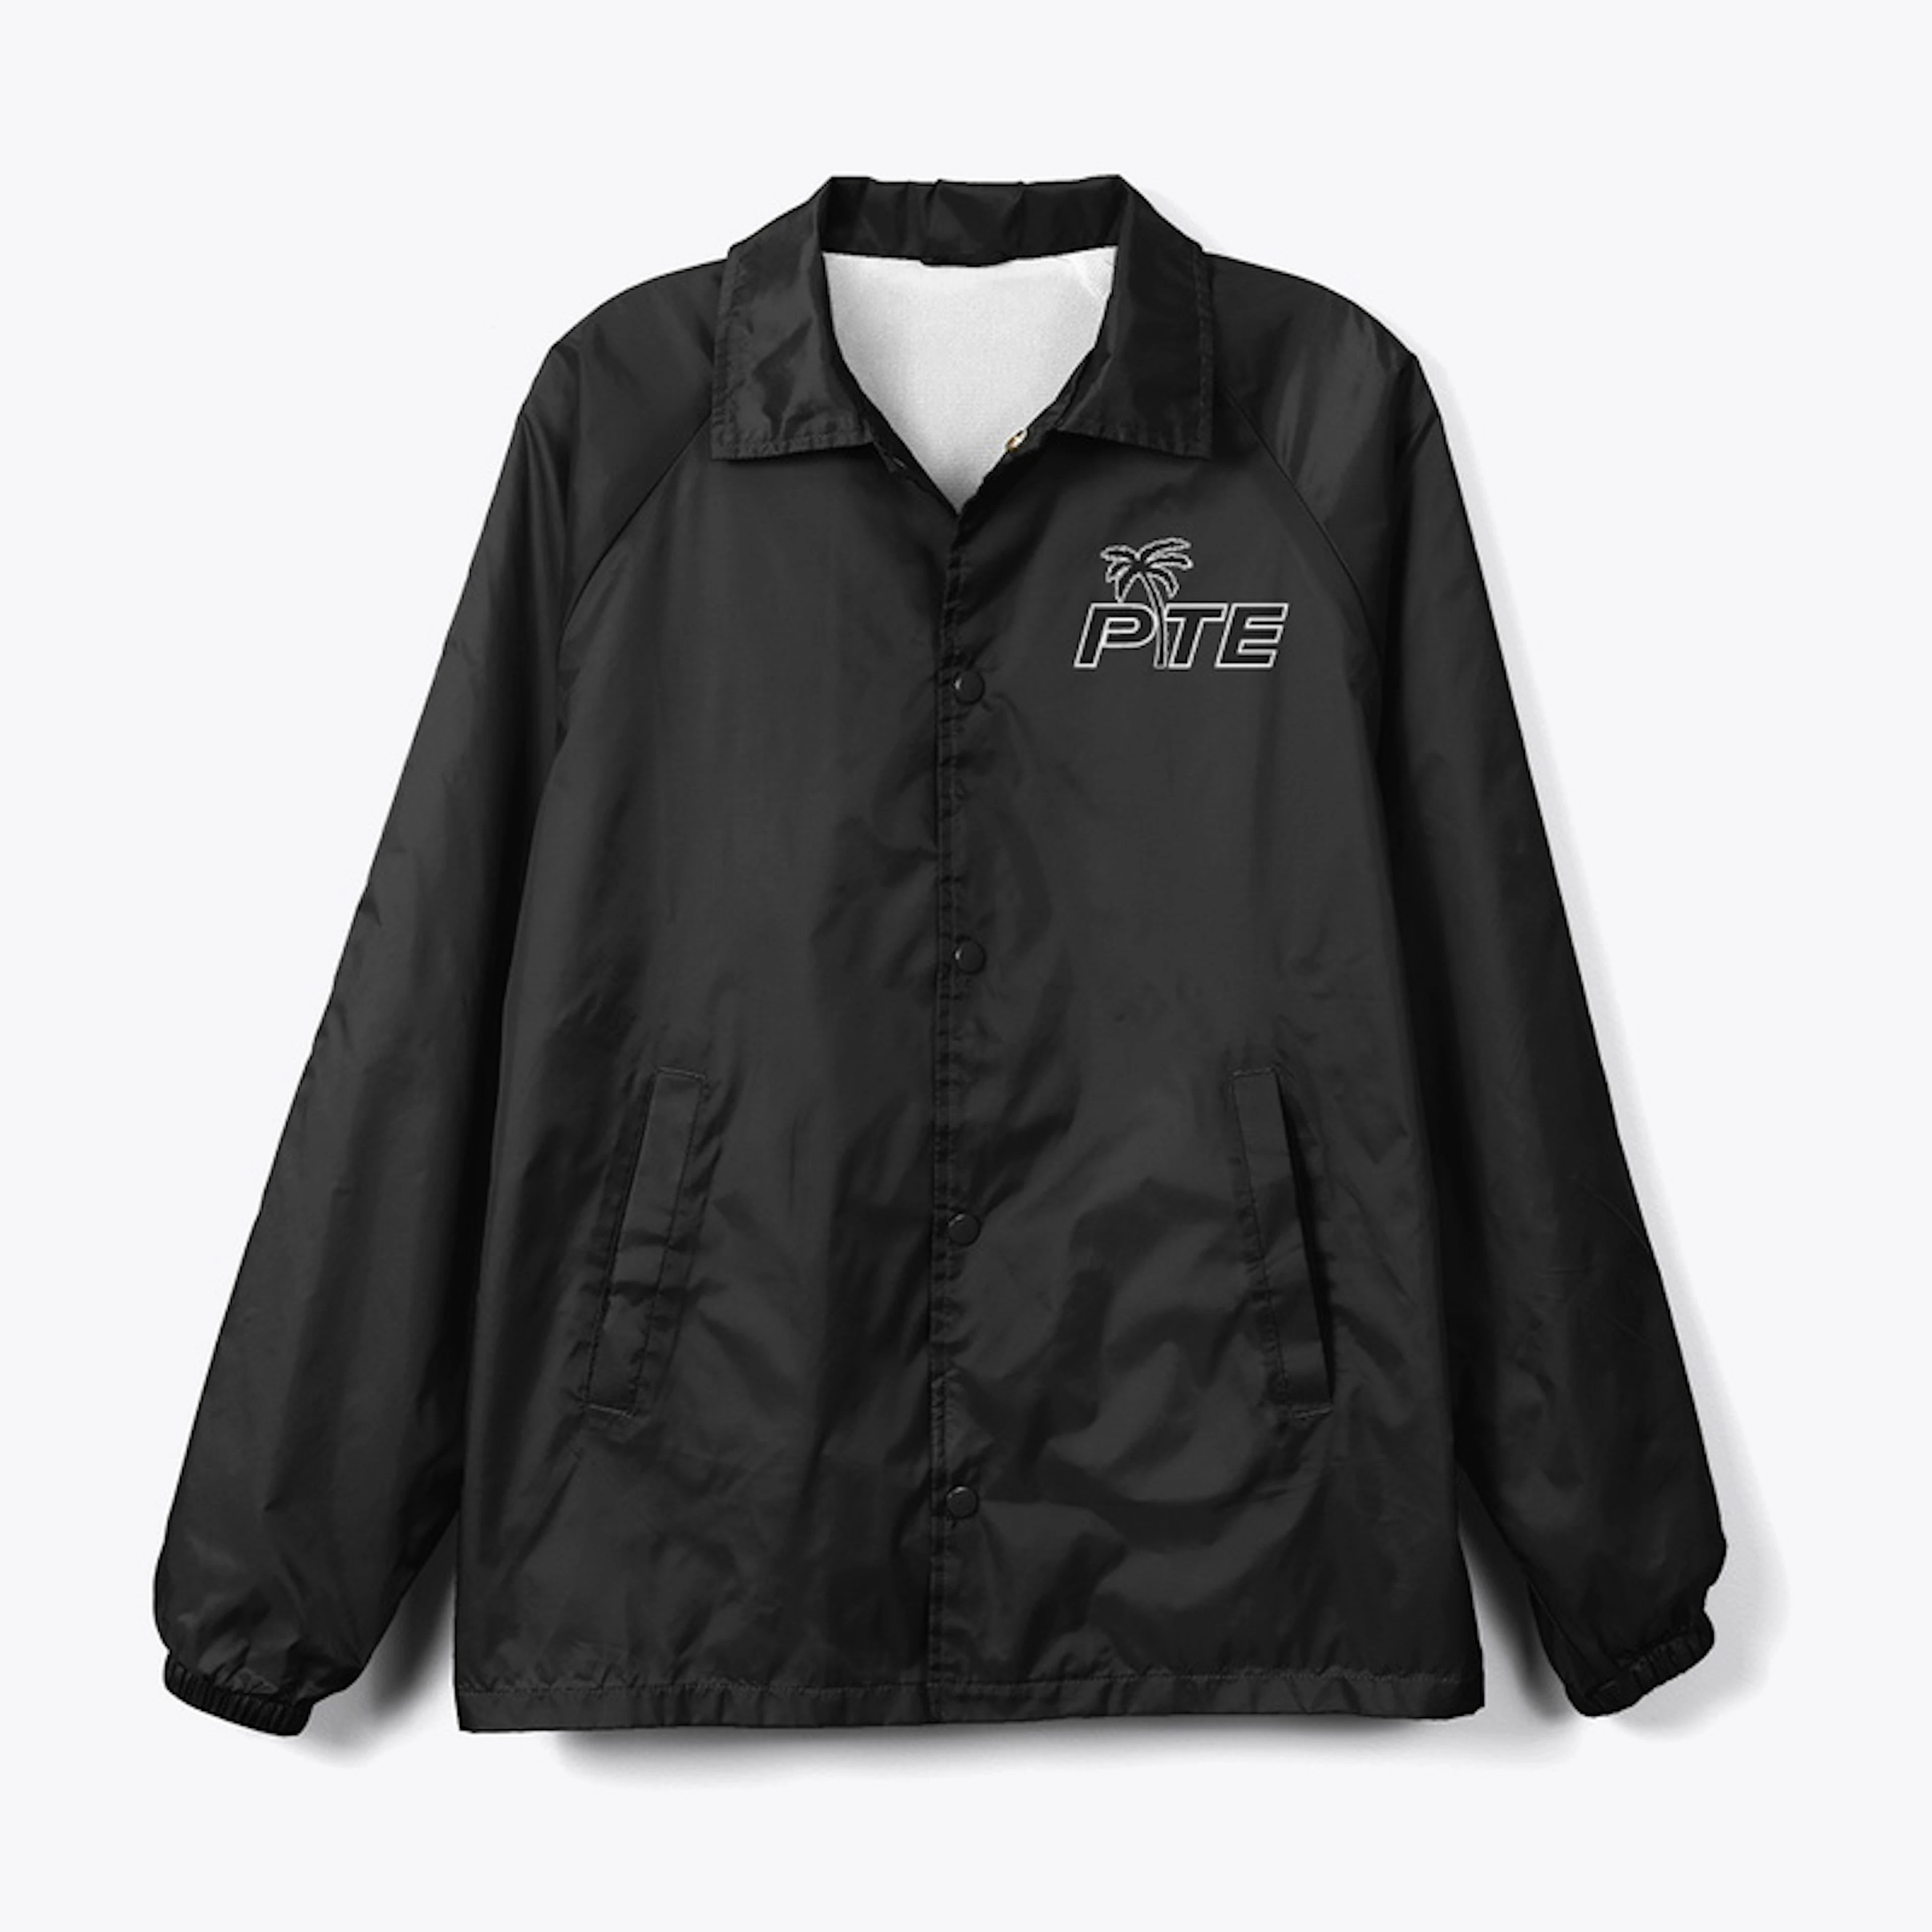 cool thermal coach pte jacket